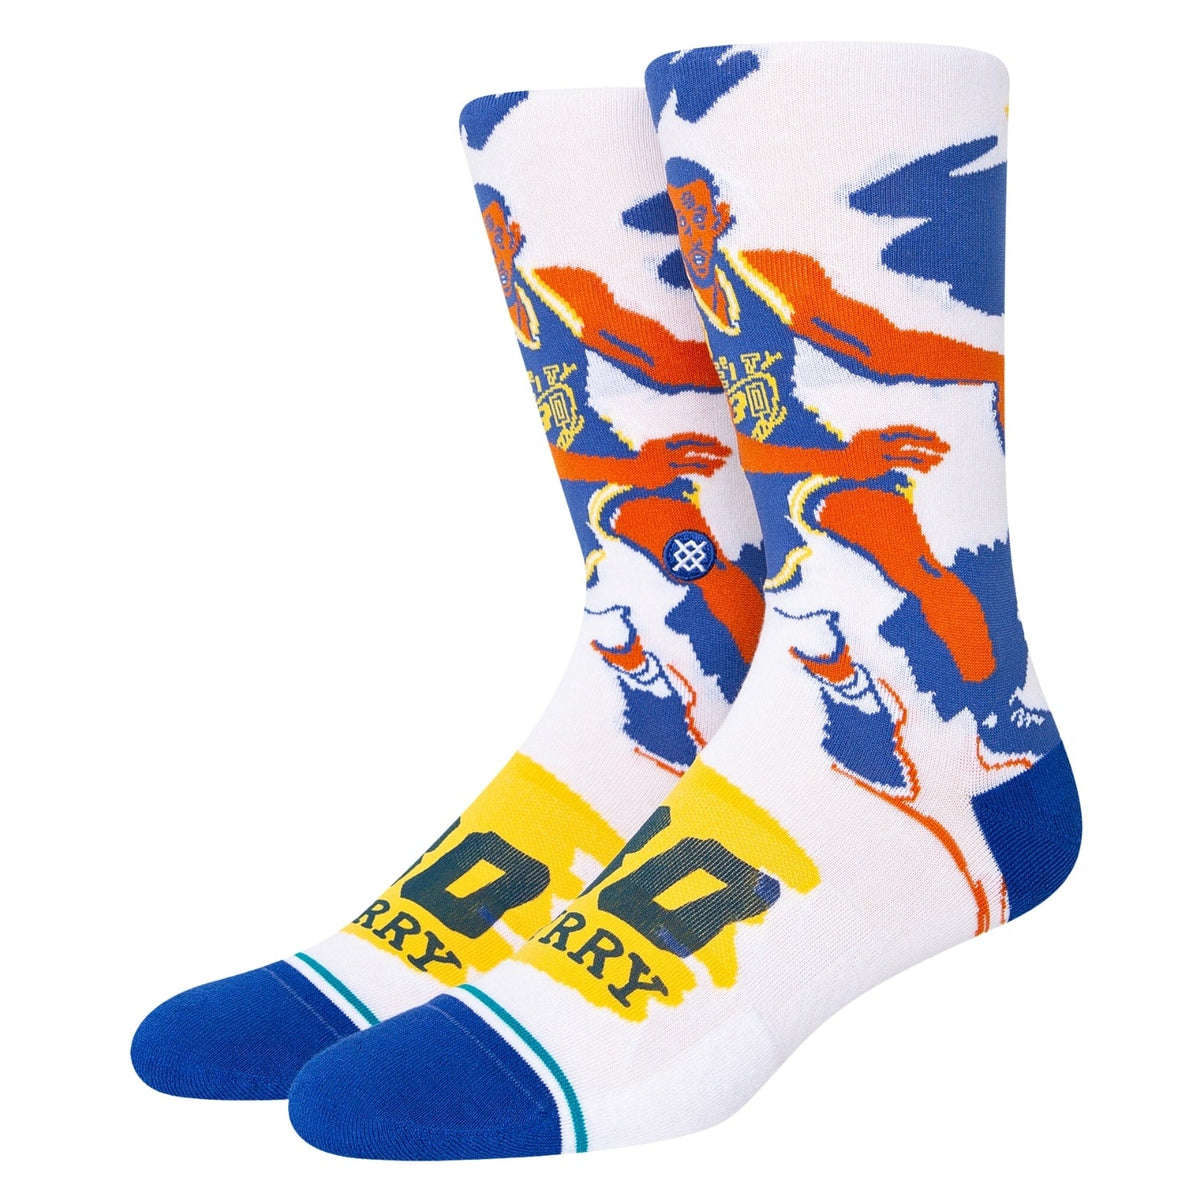 Stance Paint Curry Socks - White - Mens Crew Length Socks by Stance L (UK8-12.5)